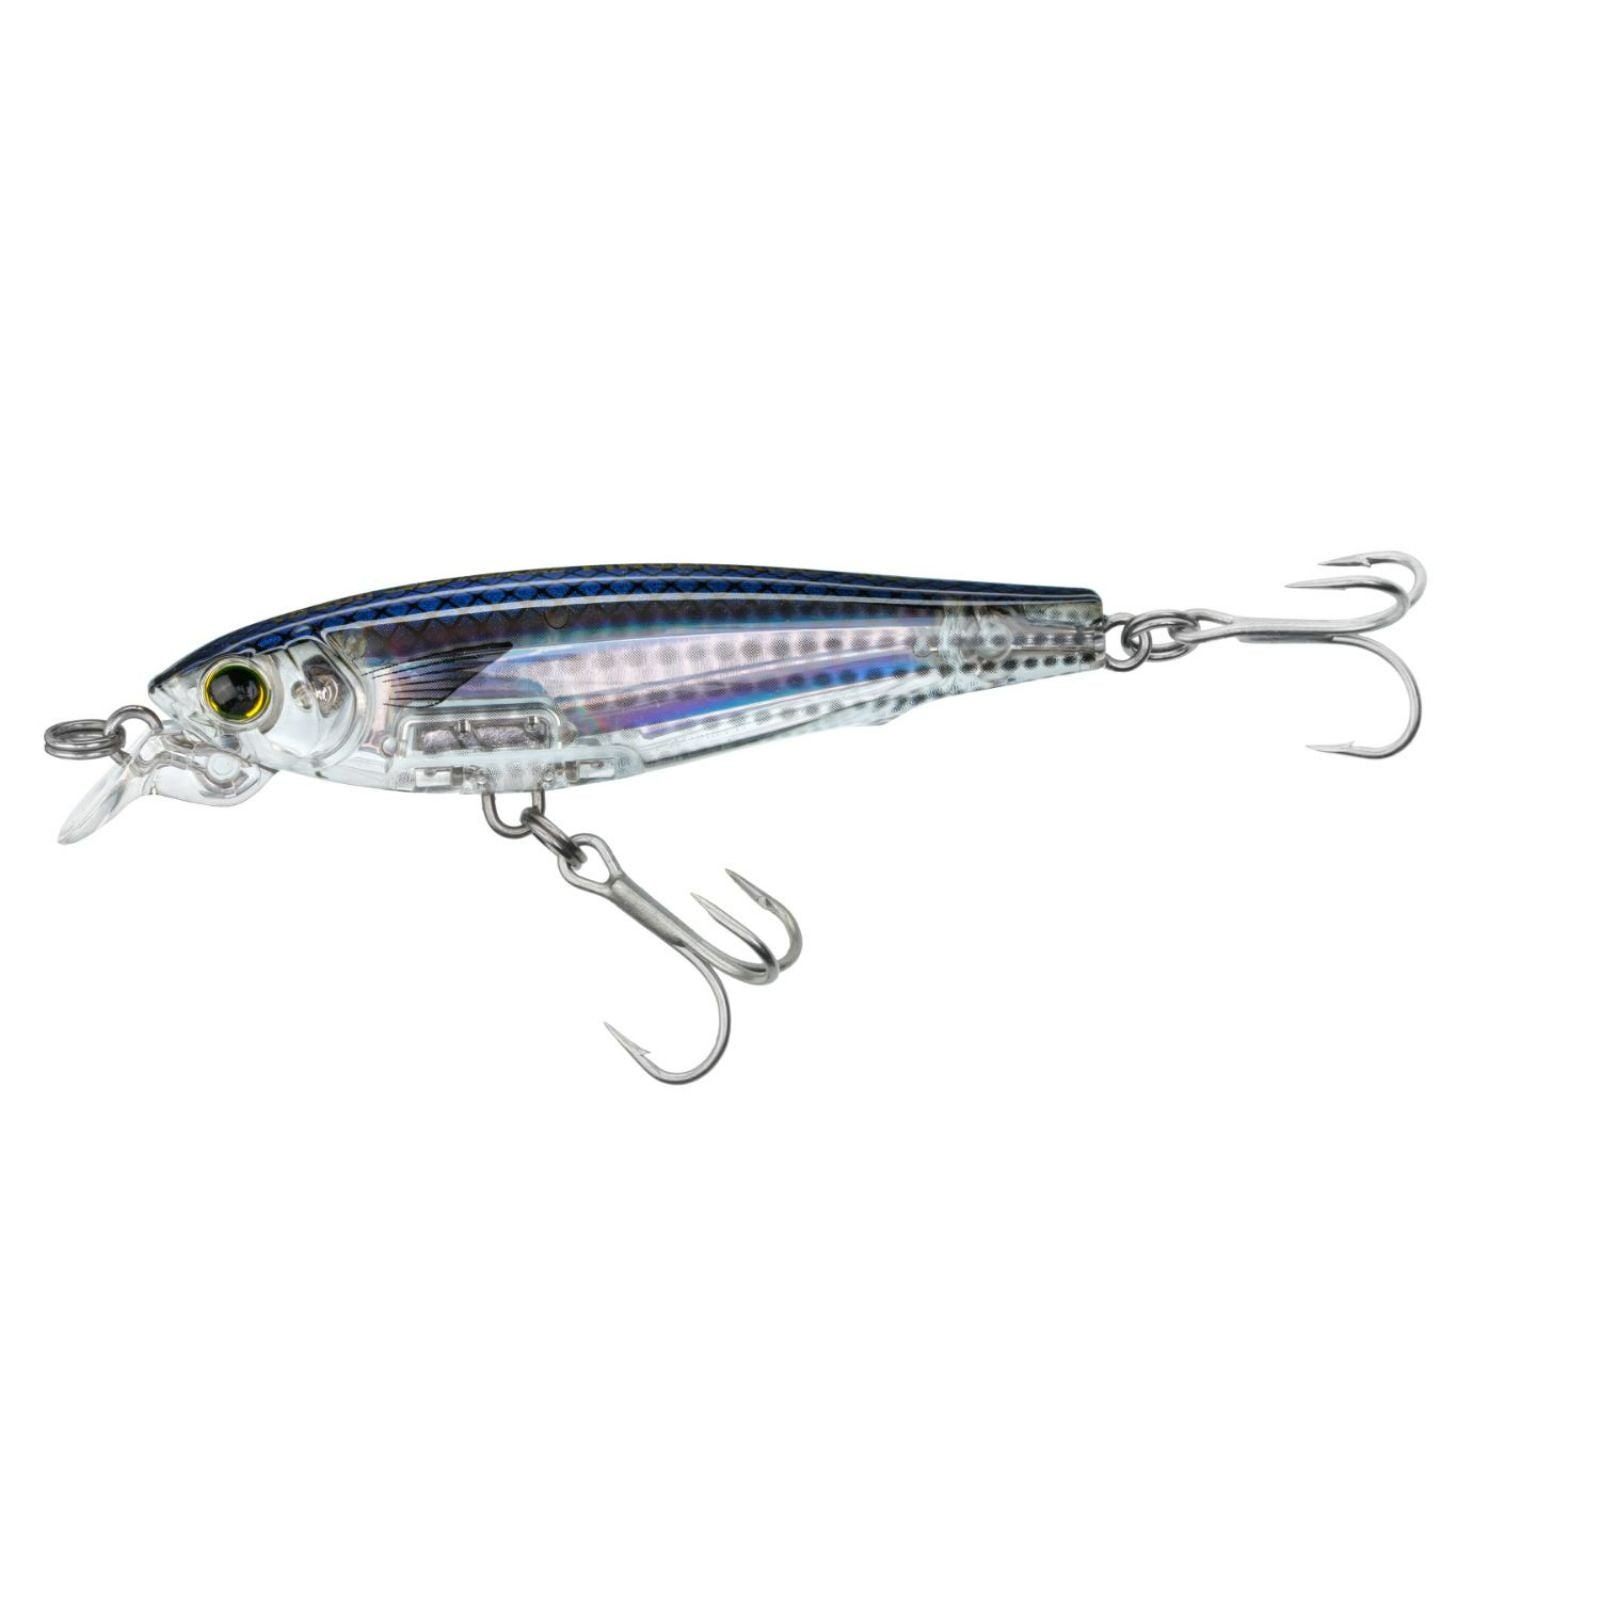 Mullet 70mm 2.75inch Yo-Zuri 3D Inshore Fingerling Lures from Fish On Outlet